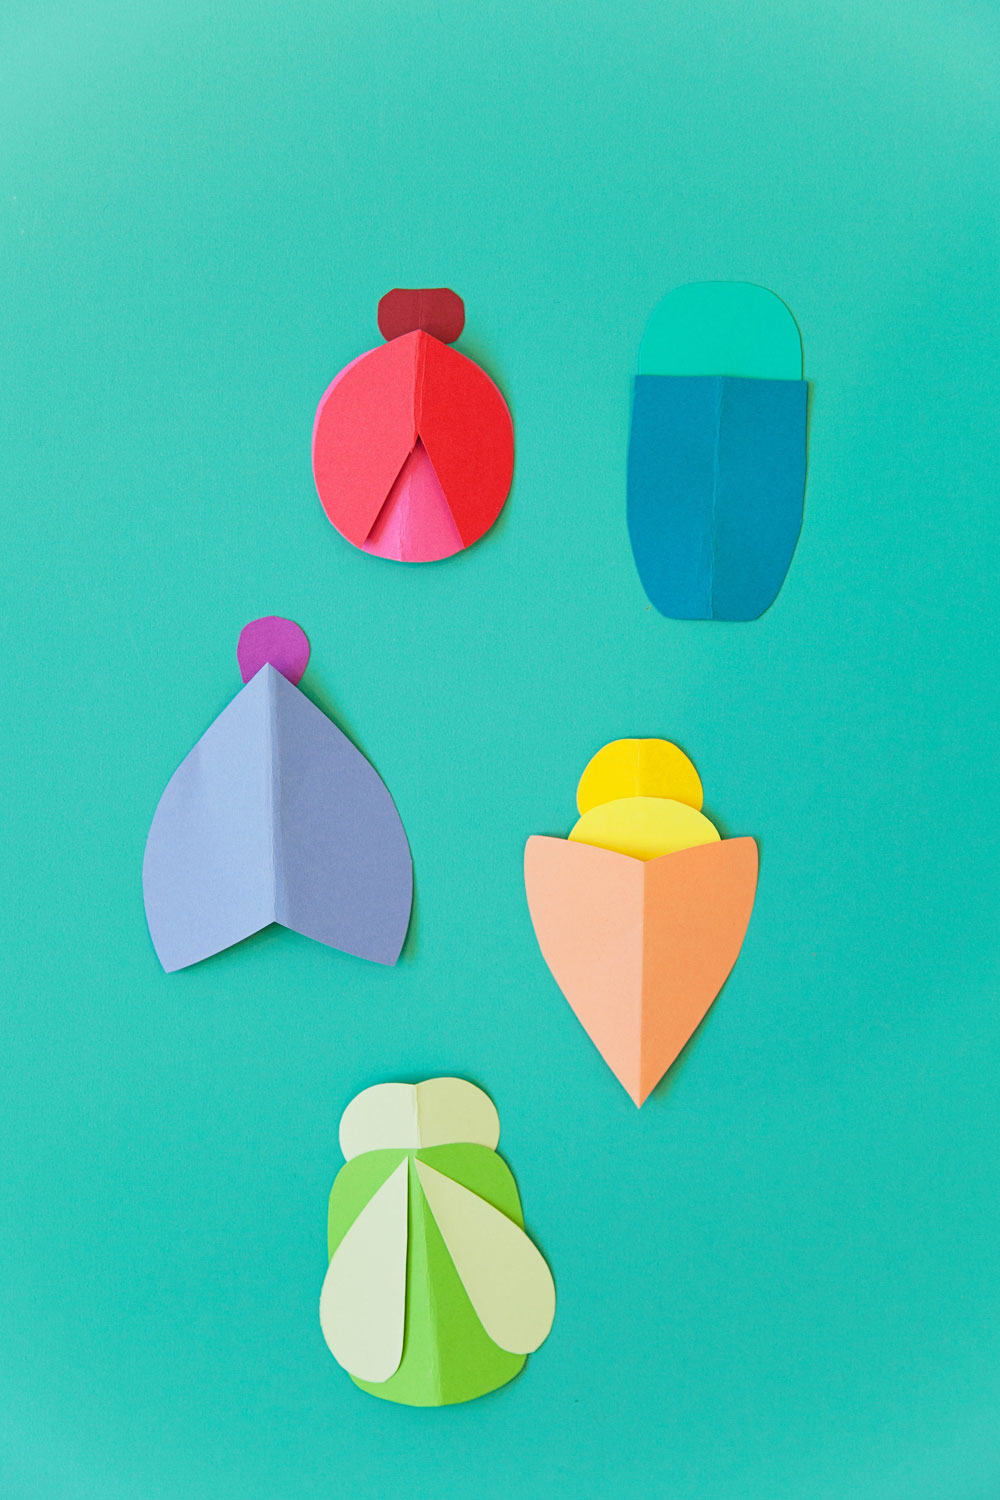 These cute DIY paper bugs are so much fun and a great craft with your kids.